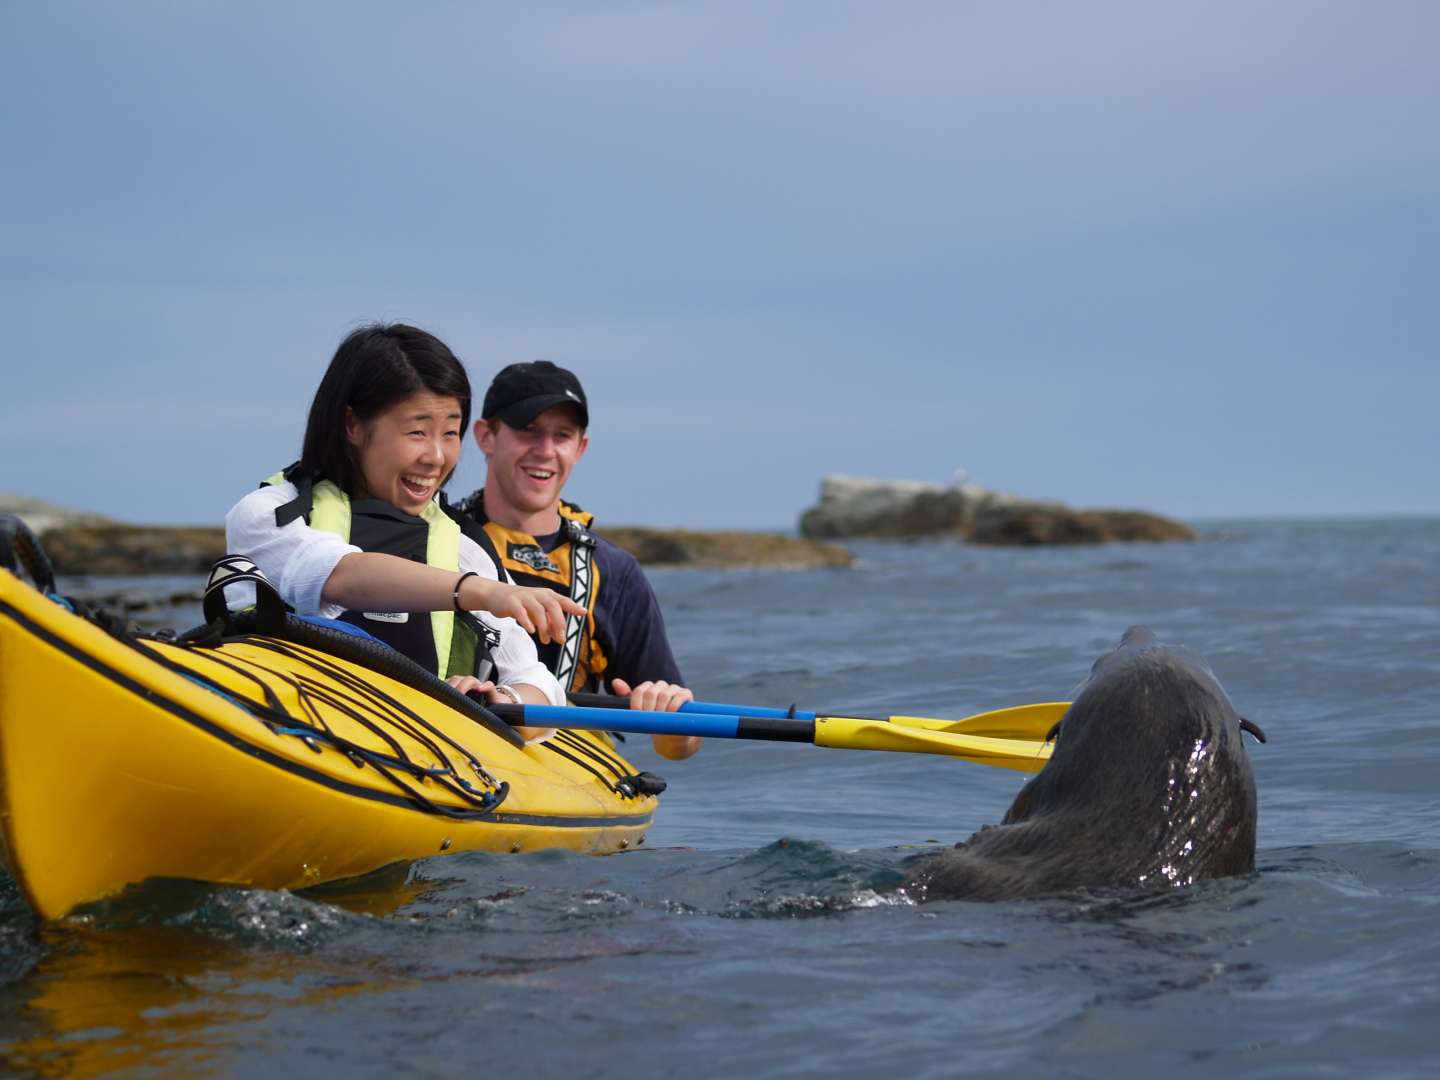 Kaikoura Kayaking with SealsDolphin and Whale Viewing